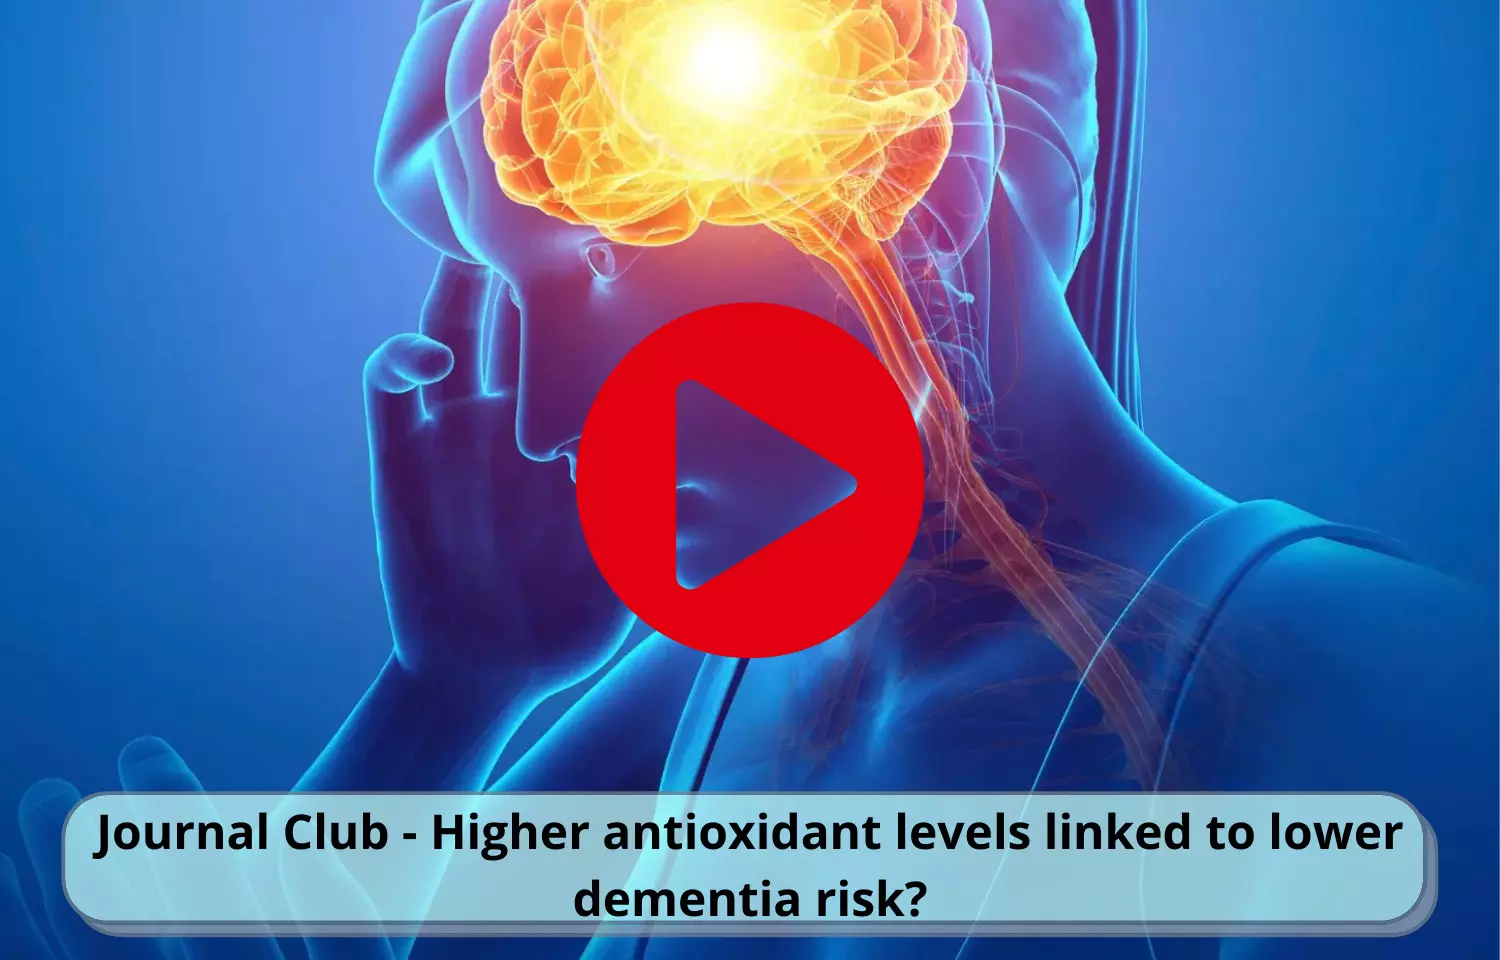 Journal Club - Higher antioxidant levels linked to lower dementia risk?